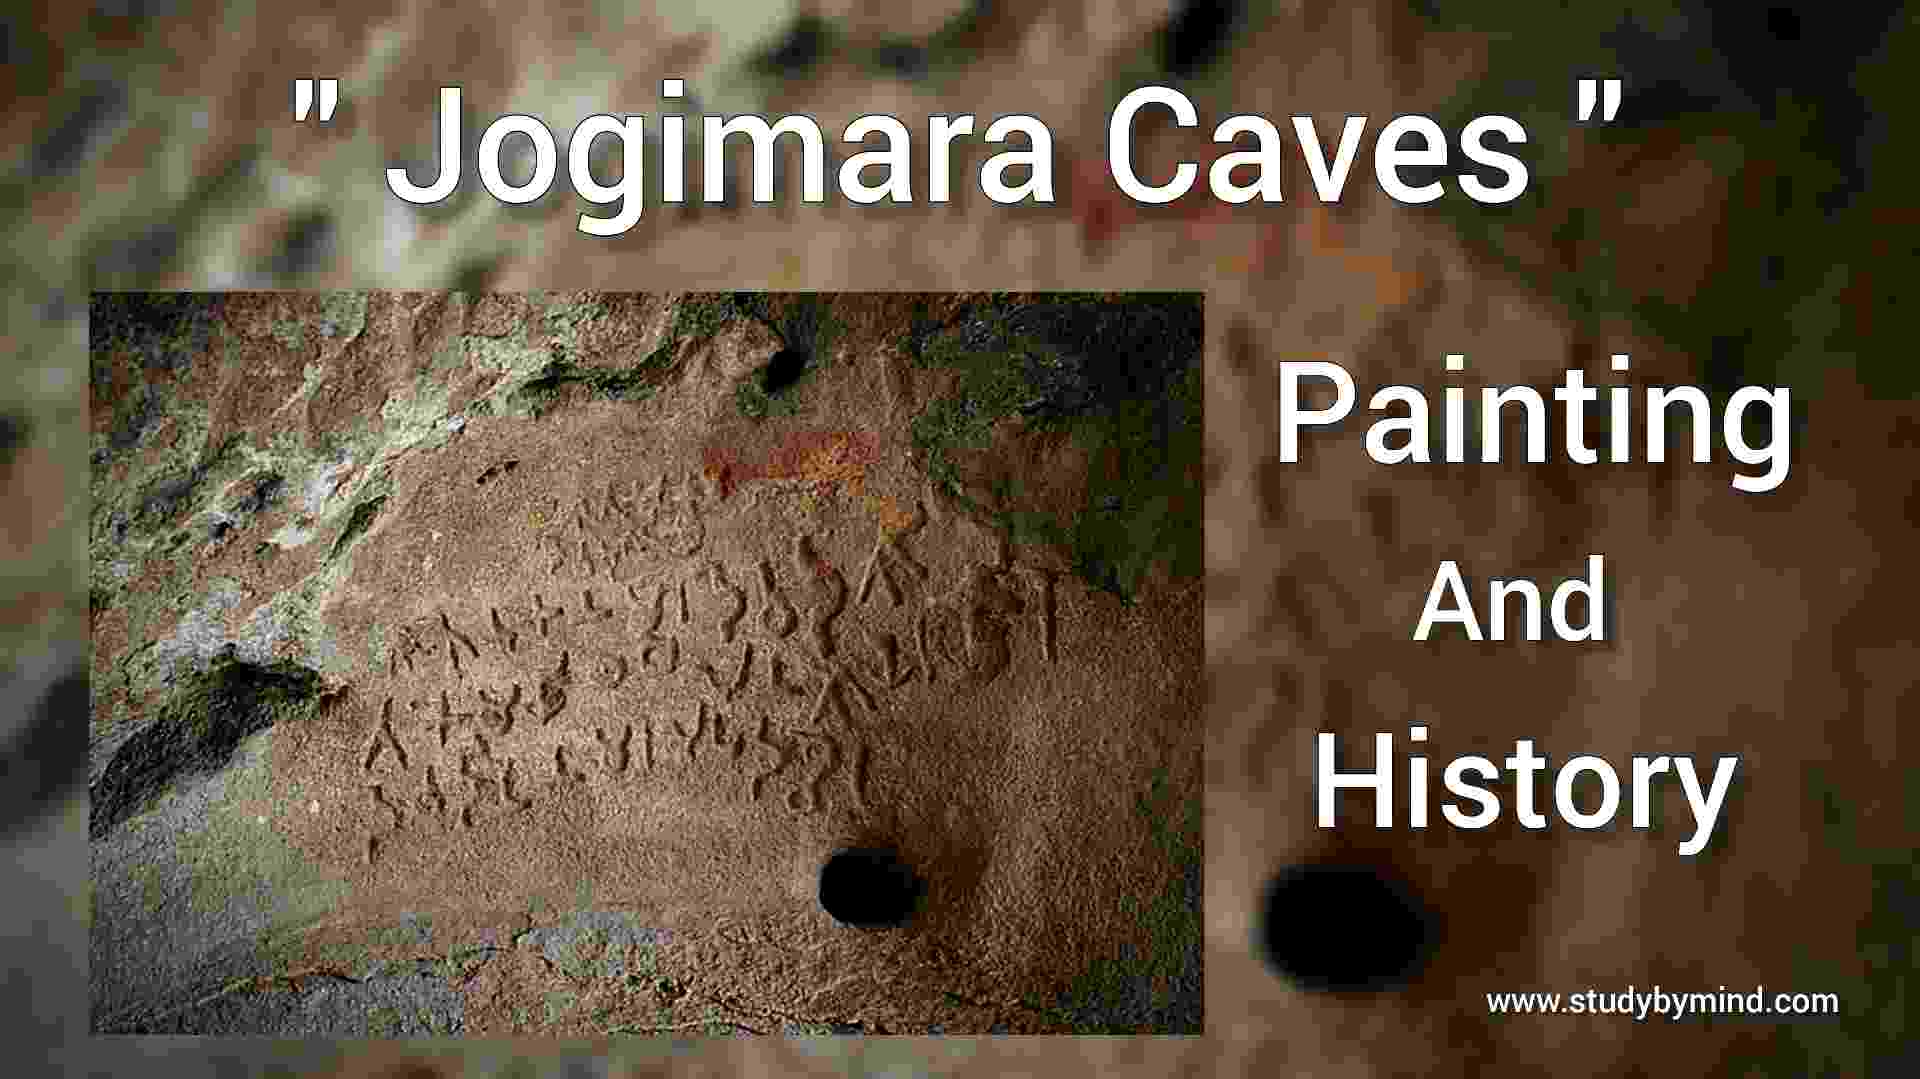 You are currently viewing Jogimara Caves and Painting History